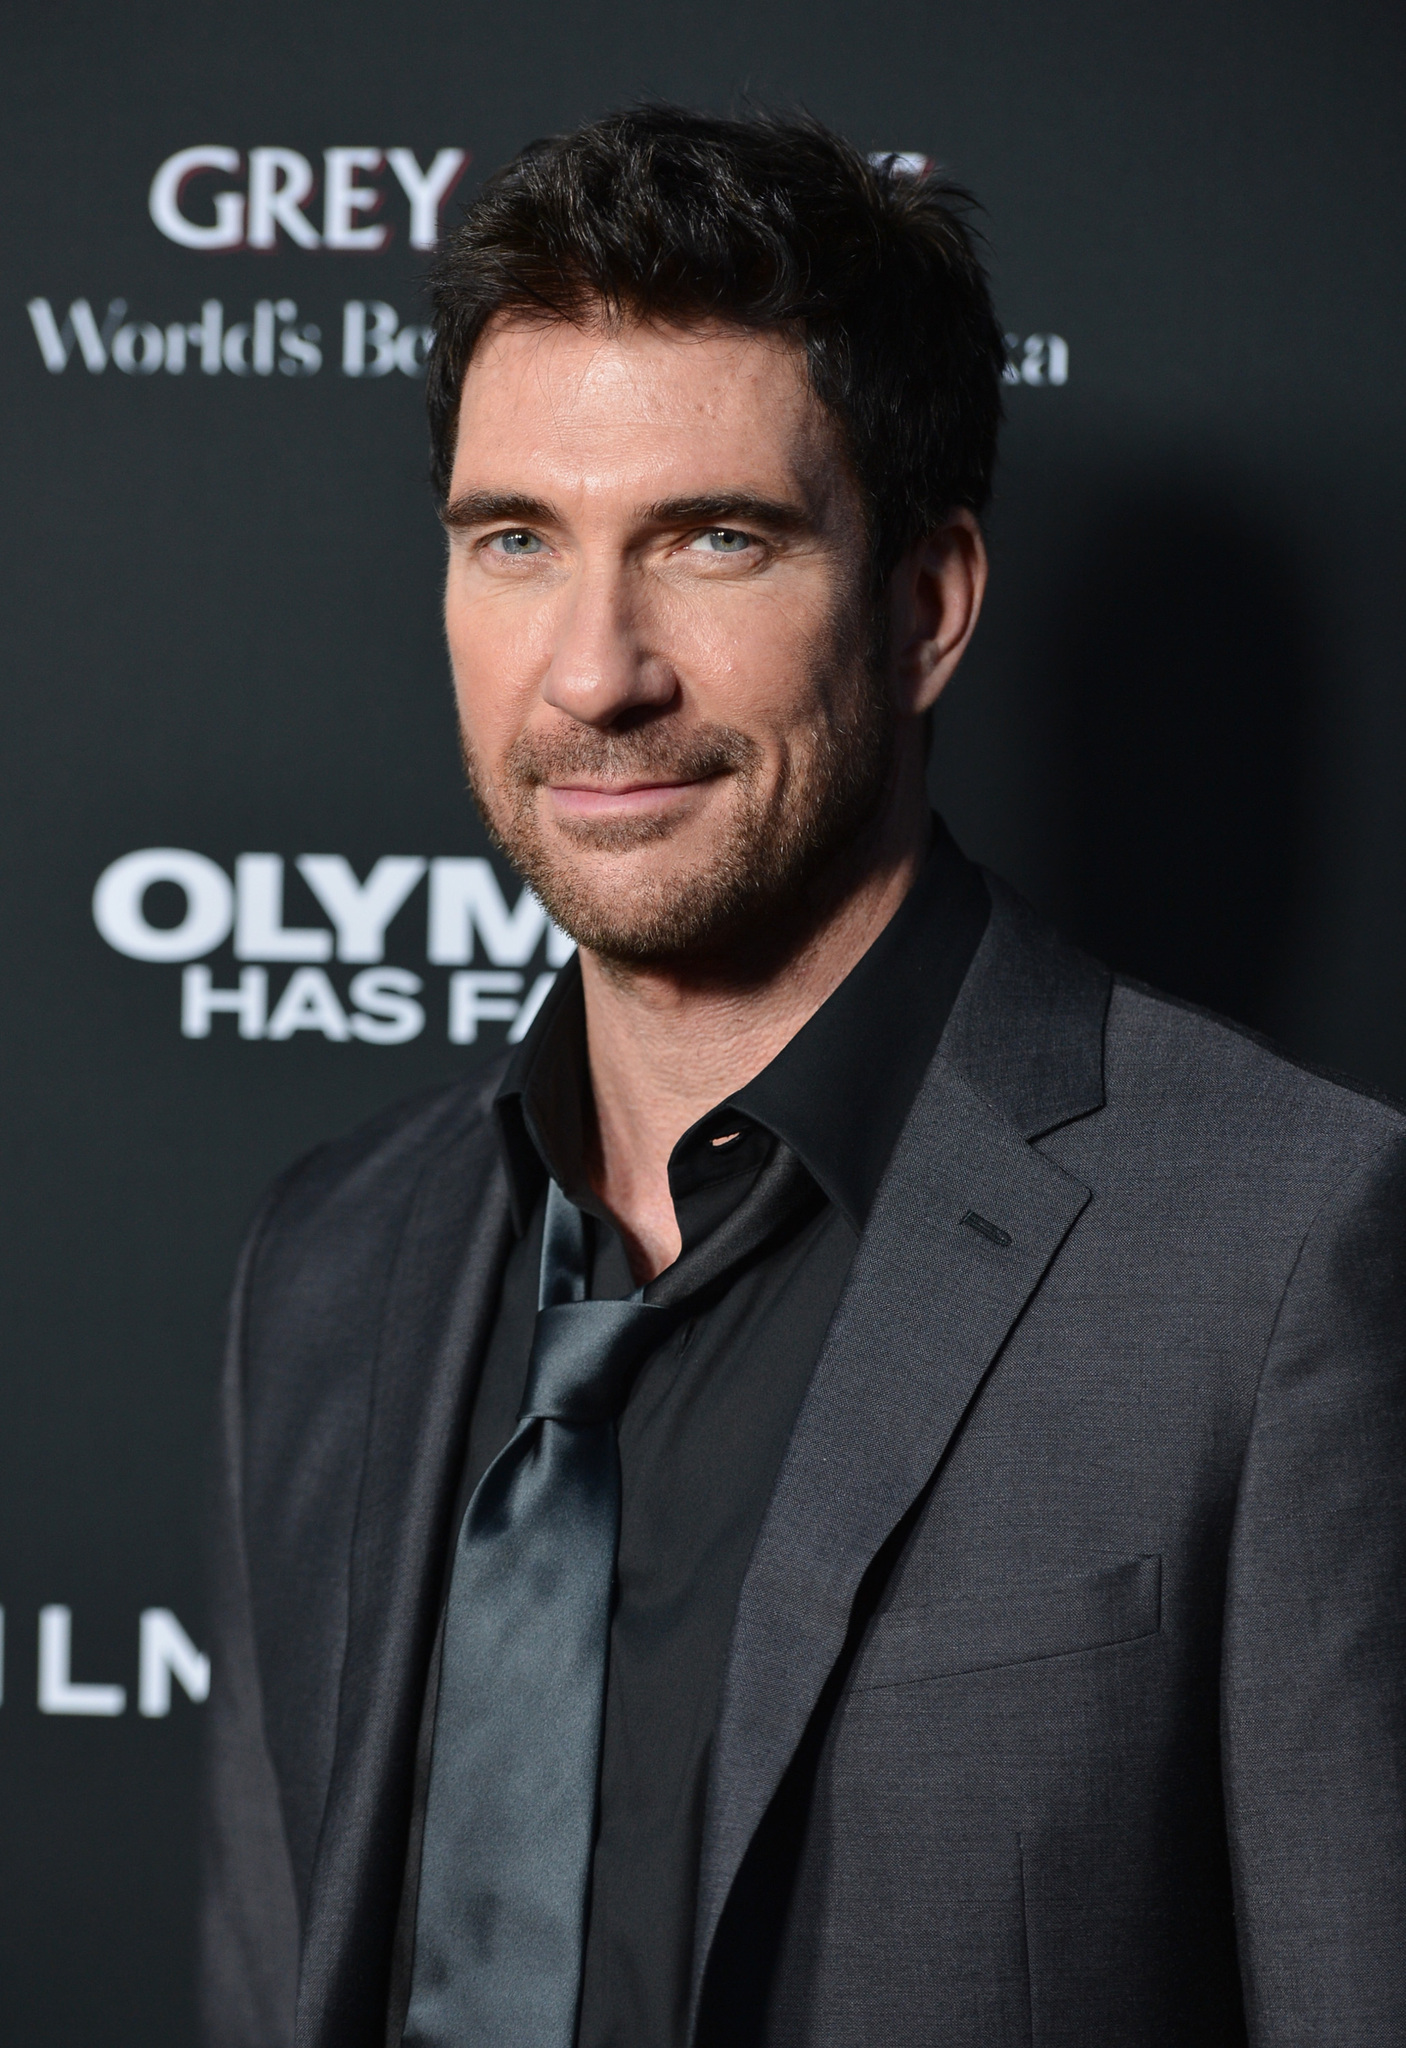 Dylan McDermott at event of Olimpo apgultis (2013)